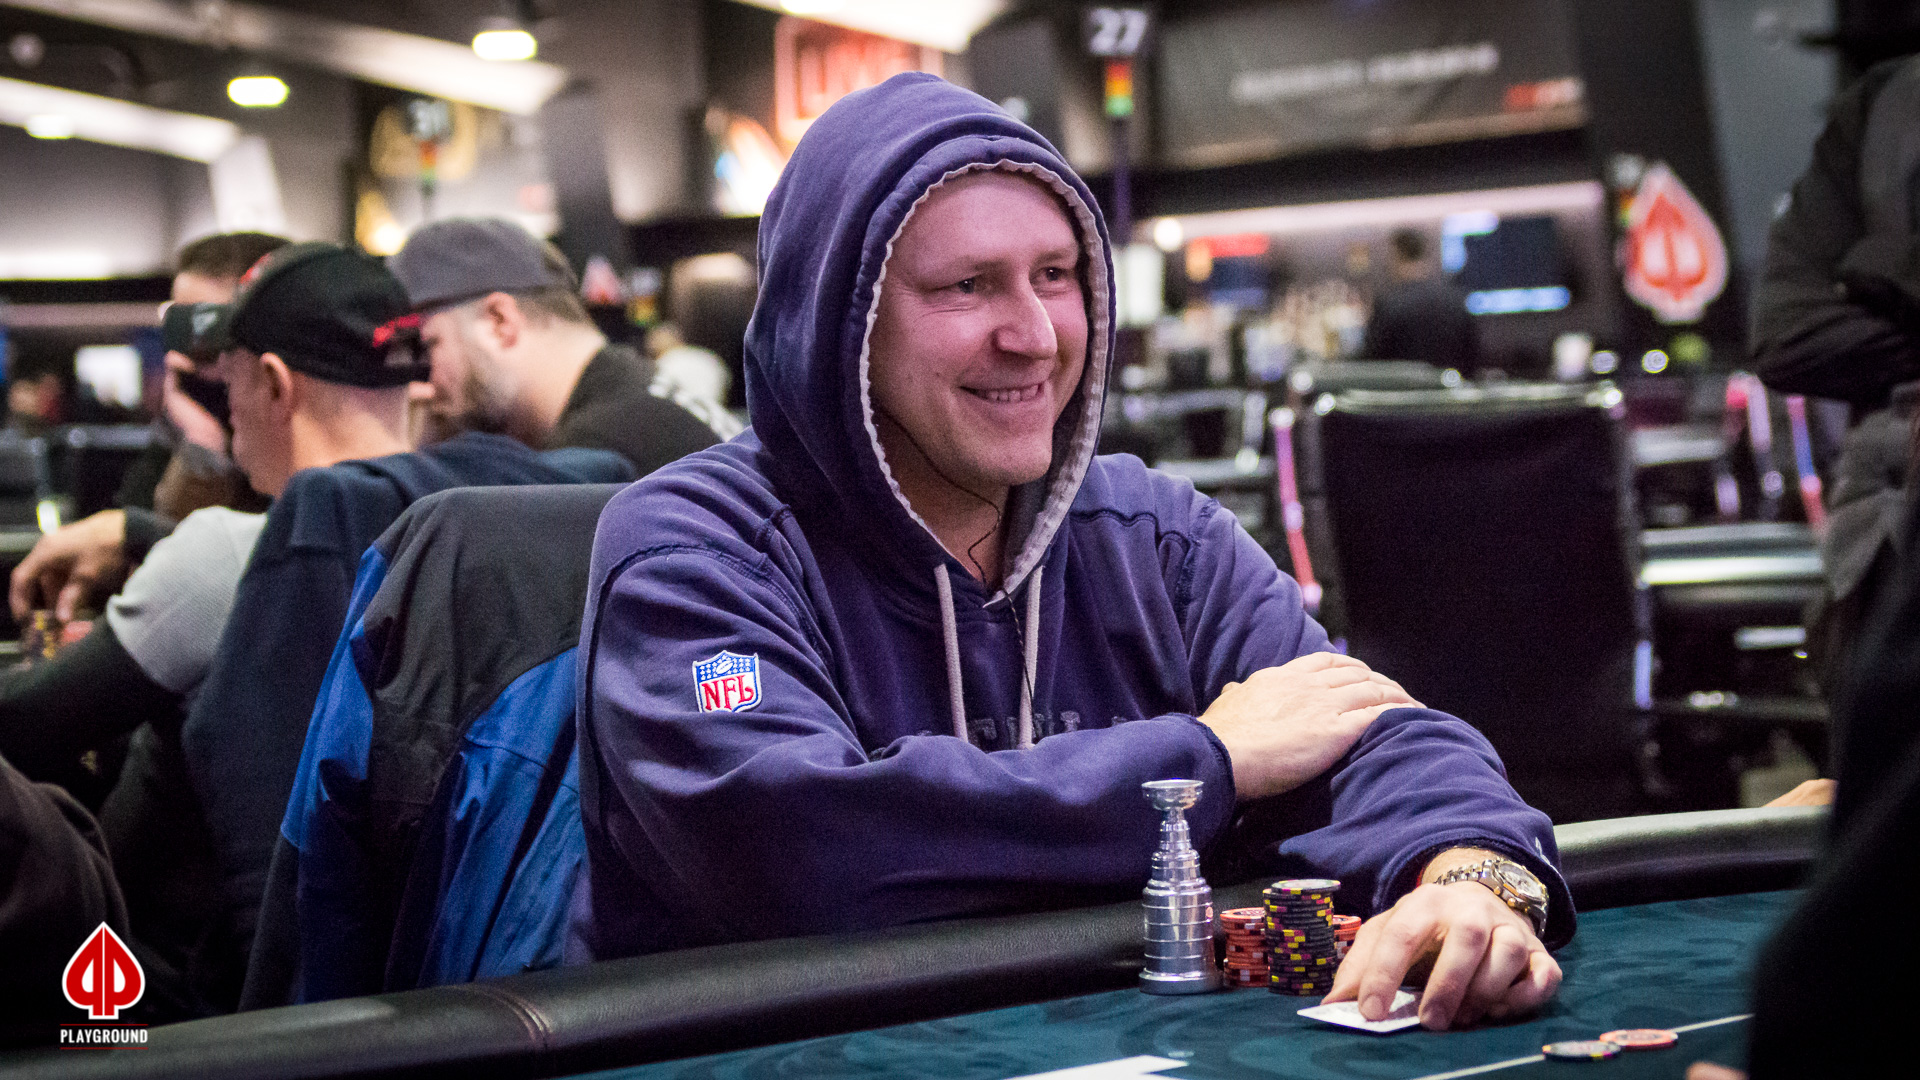 Jean Roy finishes in fourth place for $25,924